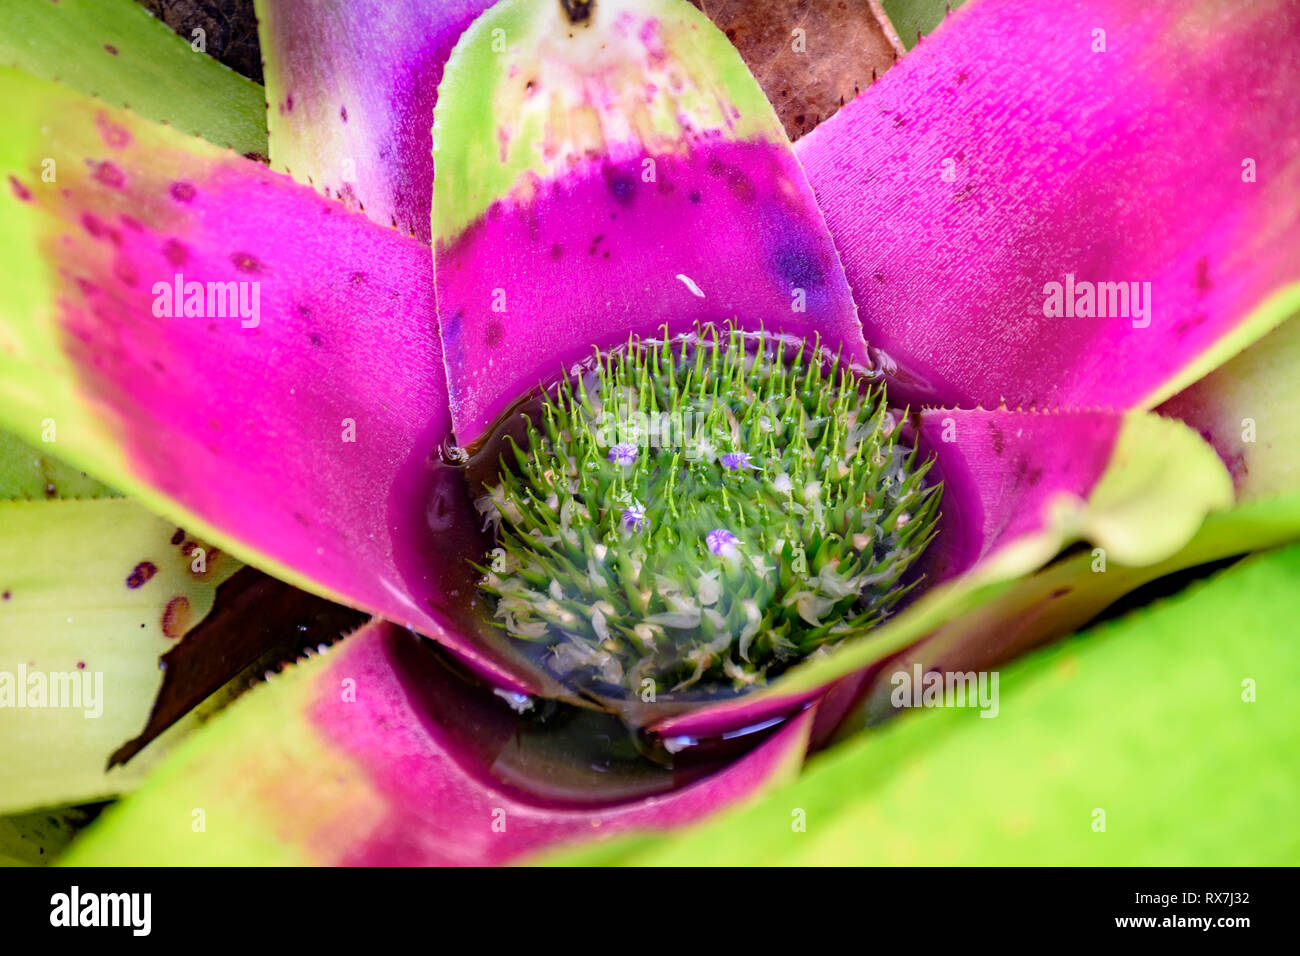 Green and pink bromeliad leaves native to the Brazilian rainforest Stock Photo